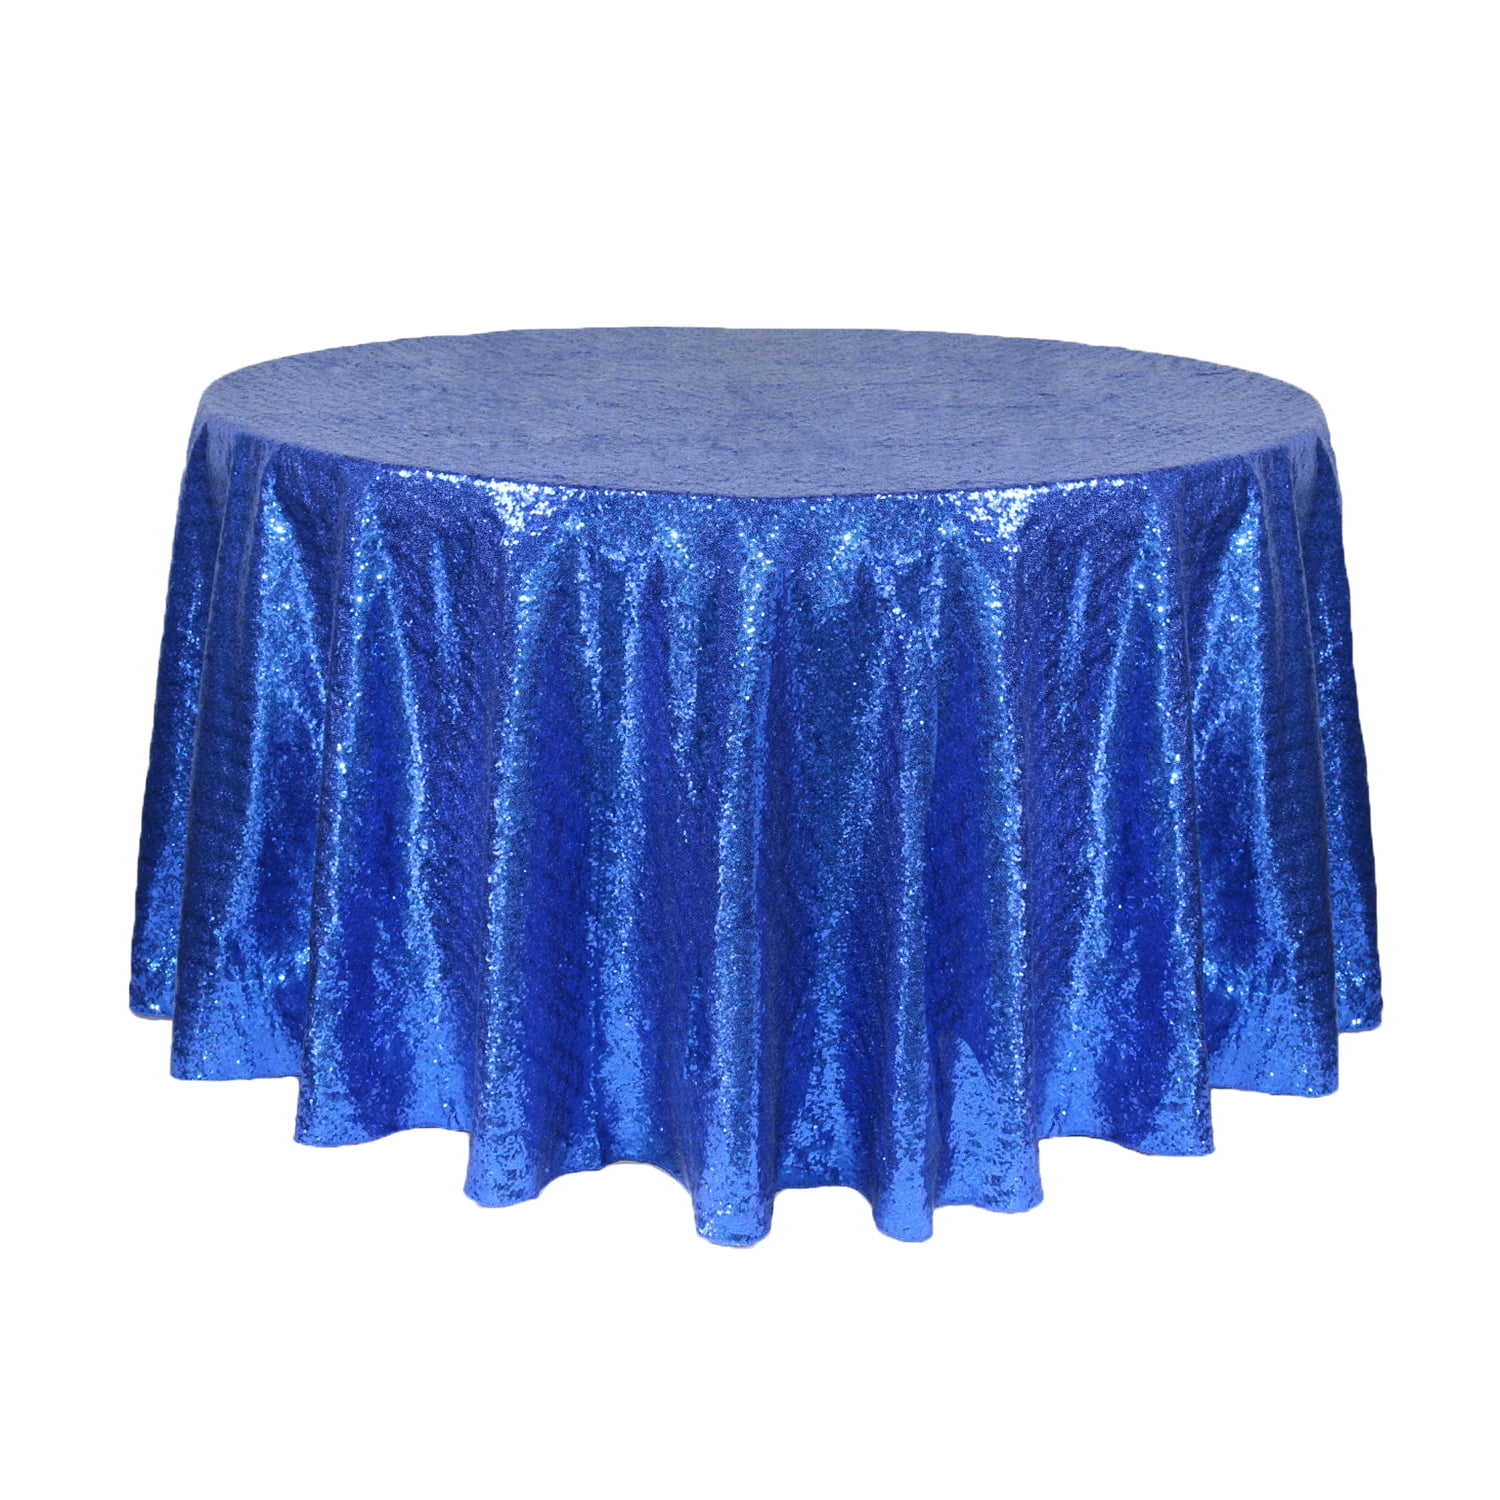 120" Round Sequin Sparkly Design Shiny Tablecloth Table Cover 4 COLORS WEDDING 